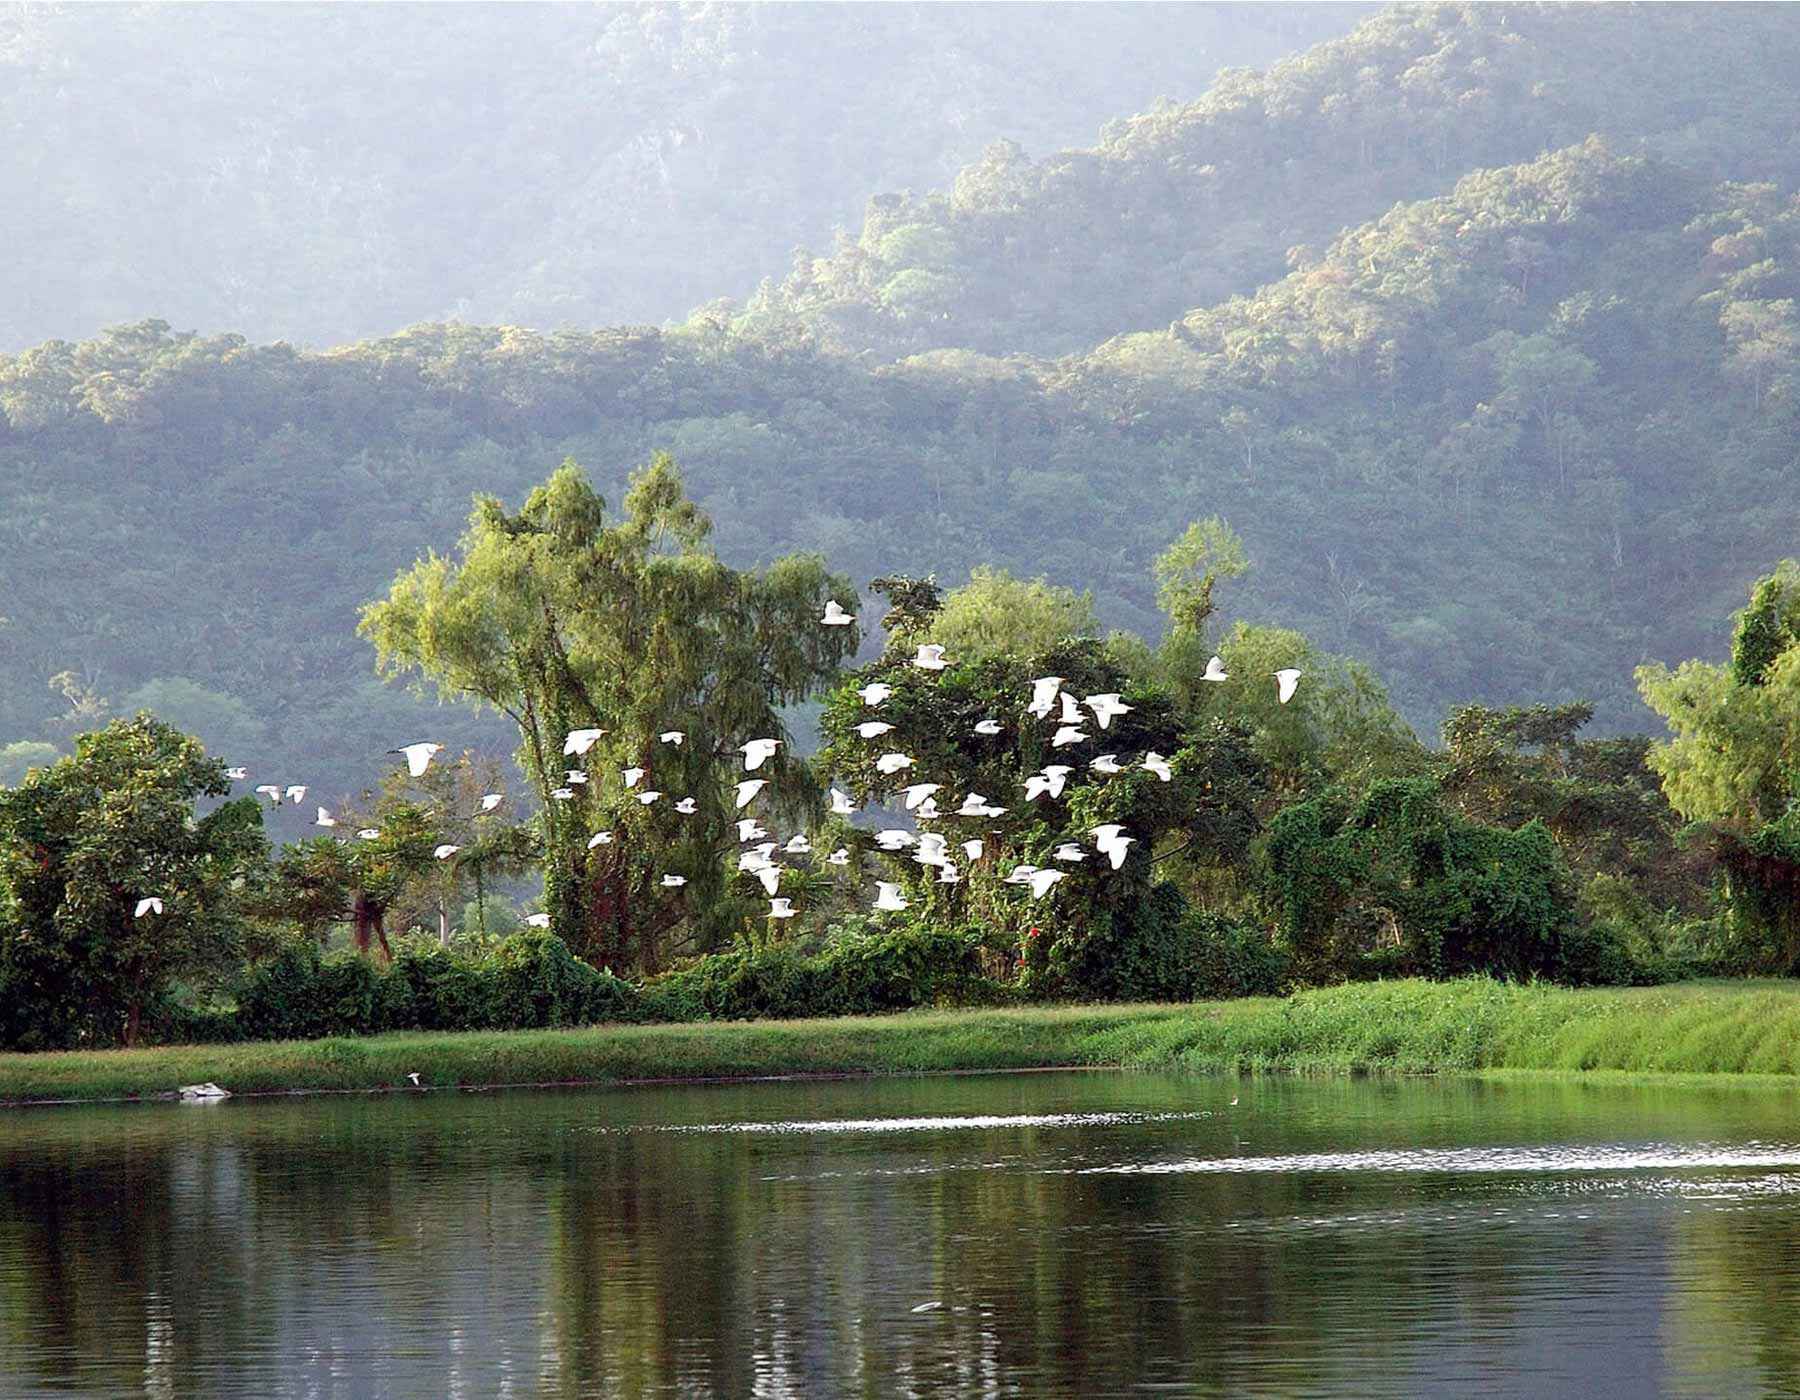 Gildan’s Biotop in Honduras has birds flying over the water and mountains in the background.